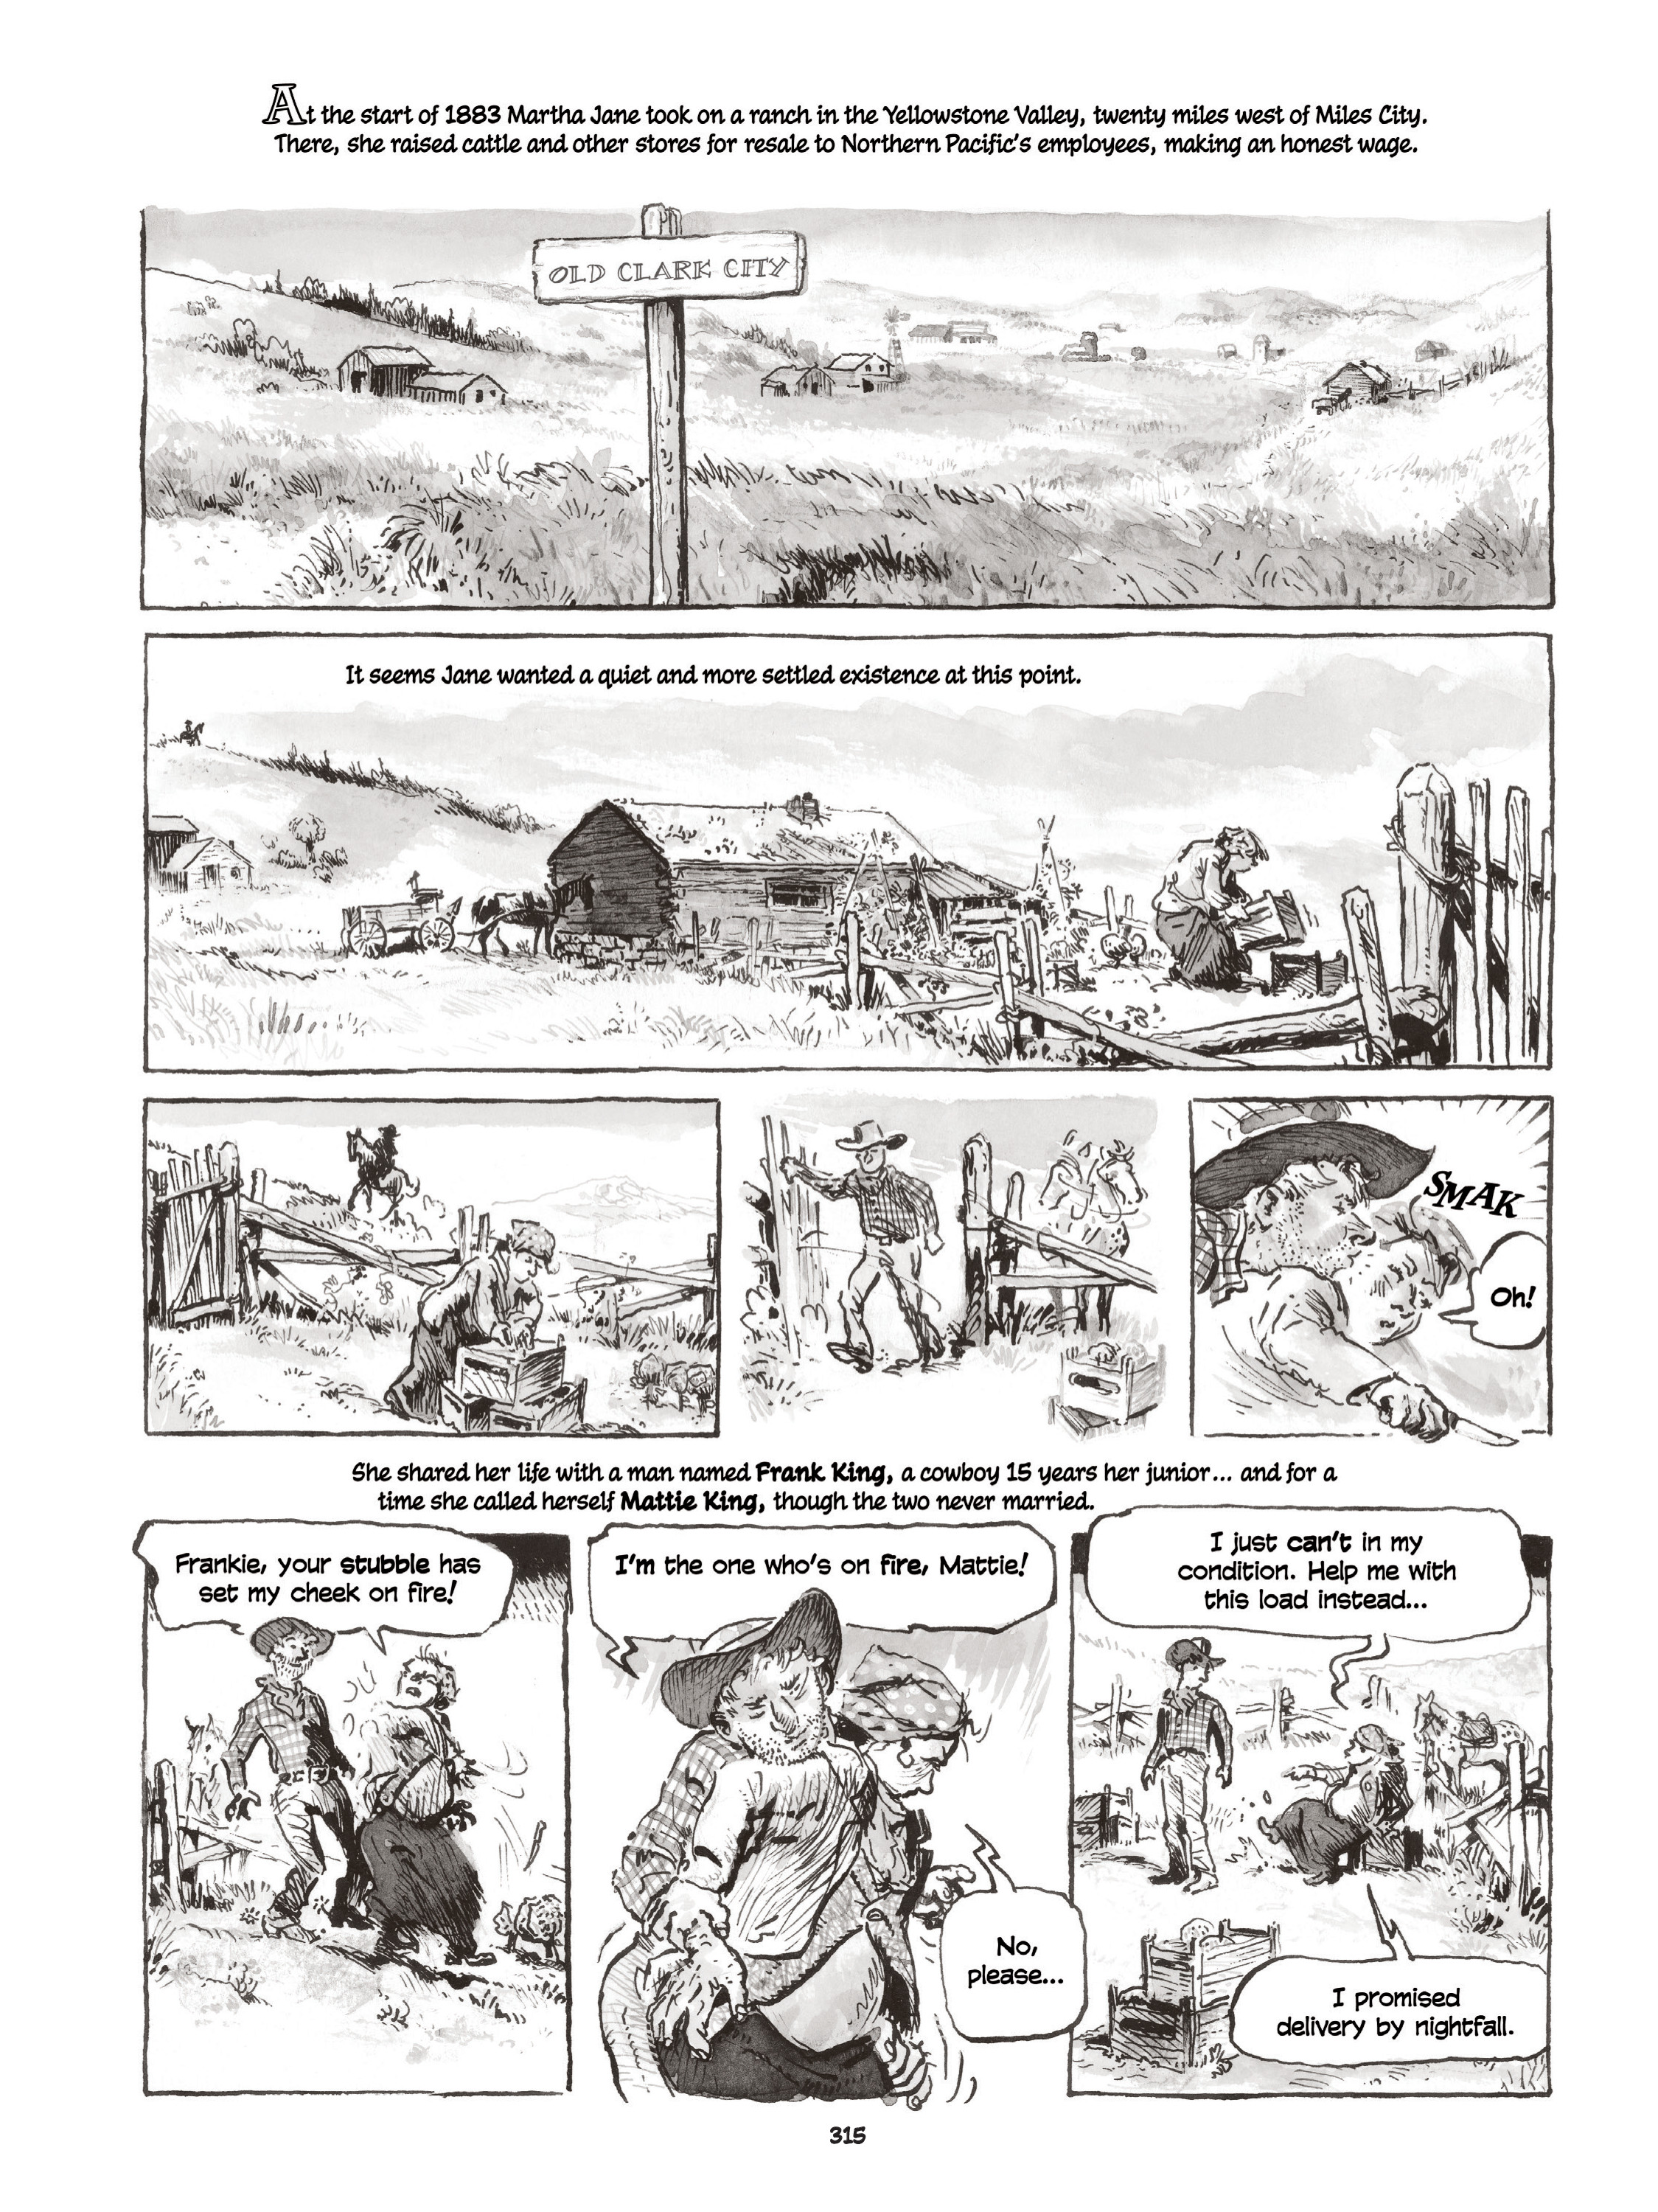 Read online Calamity Jane: The Calamitous Life of Martha Jane Cannary comic -  Issue # TPB (Part 4) - 16